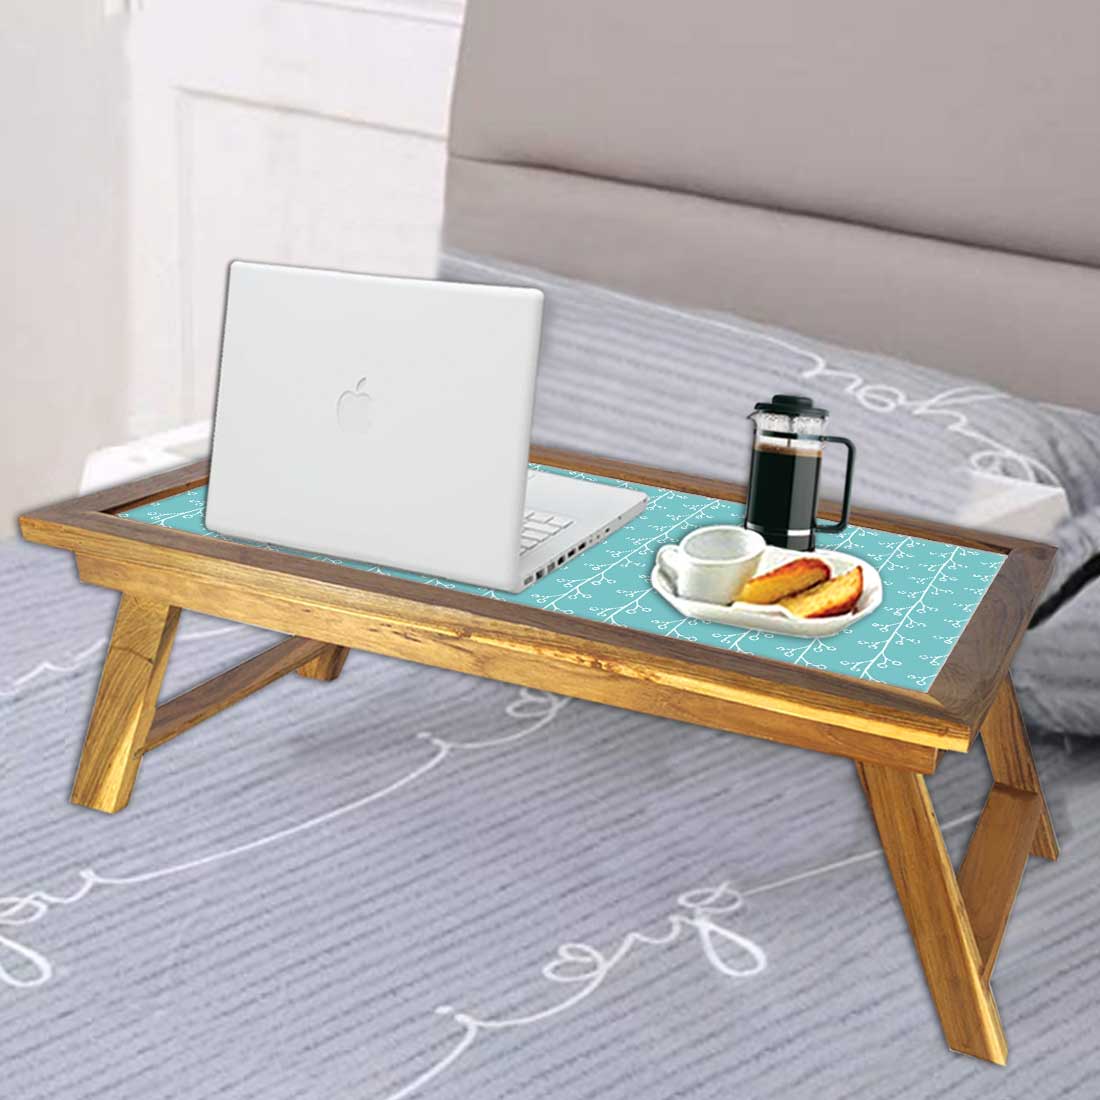 Nutcase Folding Laptop Table For Home Bed Lapdesk Breakfast Table Foldable Teak Wooden Study Desk - Blue Branches Nutcase